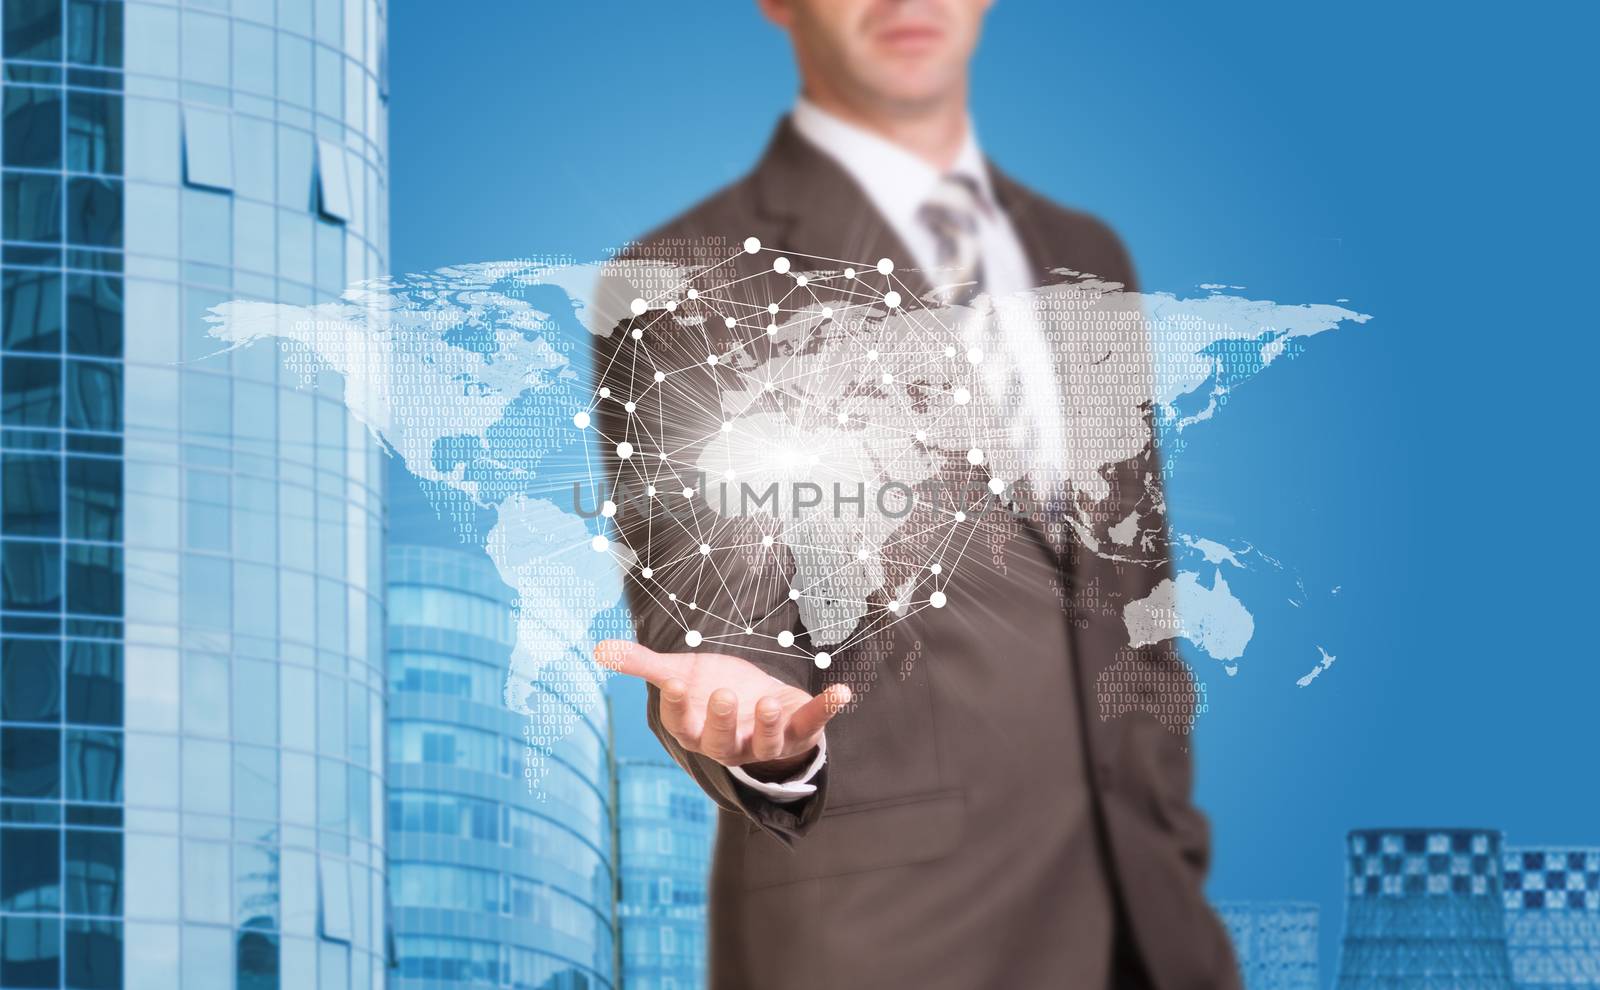 Business man hold world map and wire-frame sphere in hand. Building as backdrop